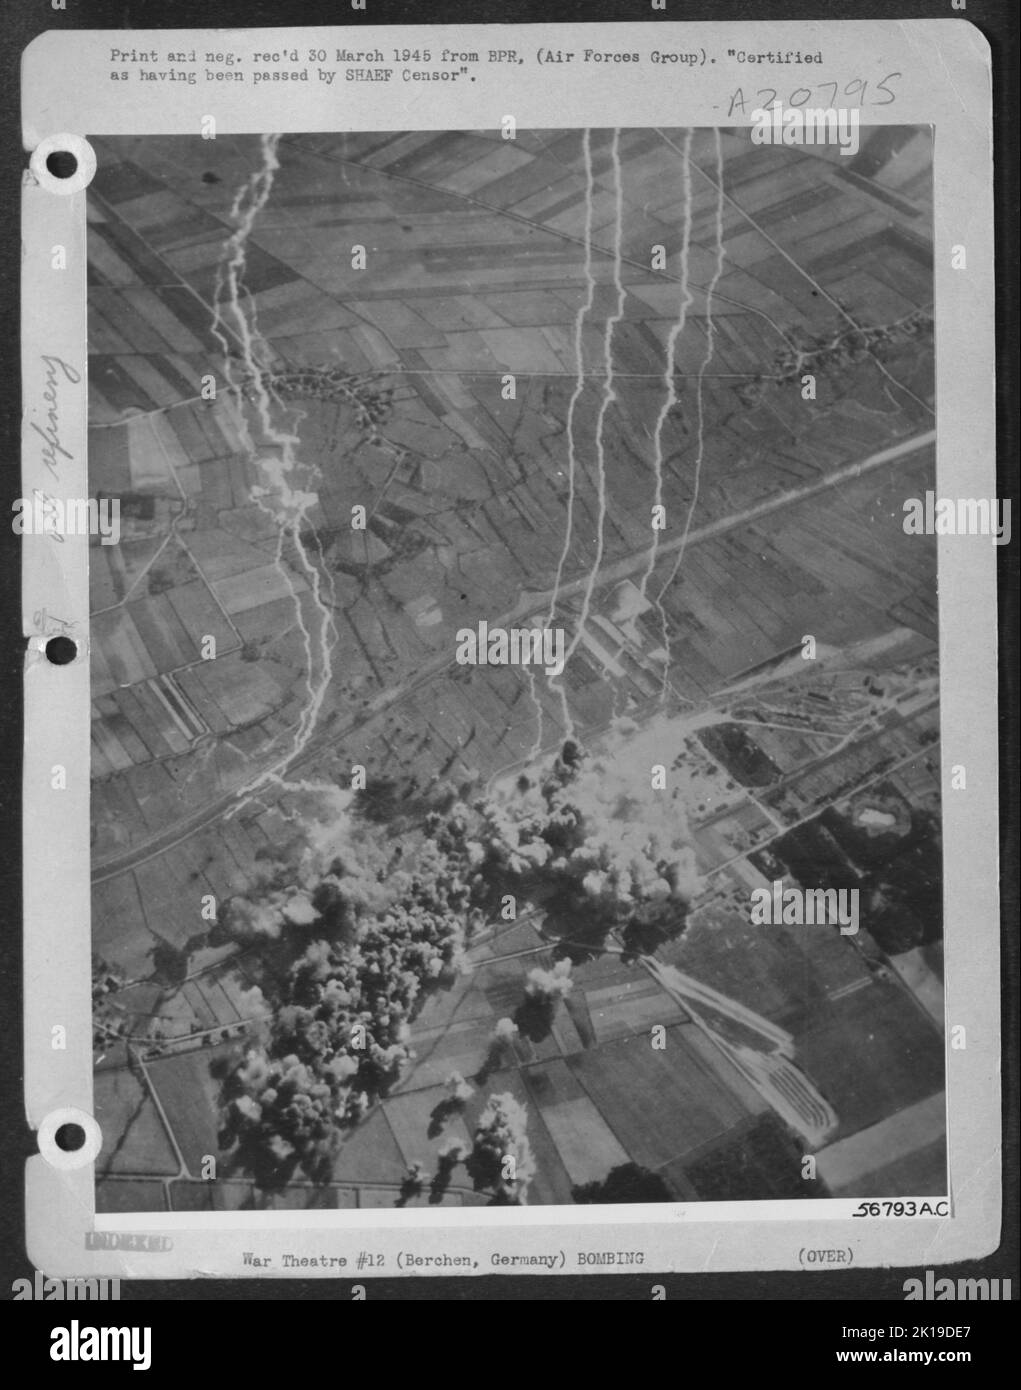 UNDERGROUND OIL STORAGE DEPOT HIT--Bombs released from 250 Consolidated B-24 Liberators of the U.S. 8th AF over Berchen in northwest Germany hit underground oil storage depots on 25 March 1945. The target was one of three similar ones Stock Photo